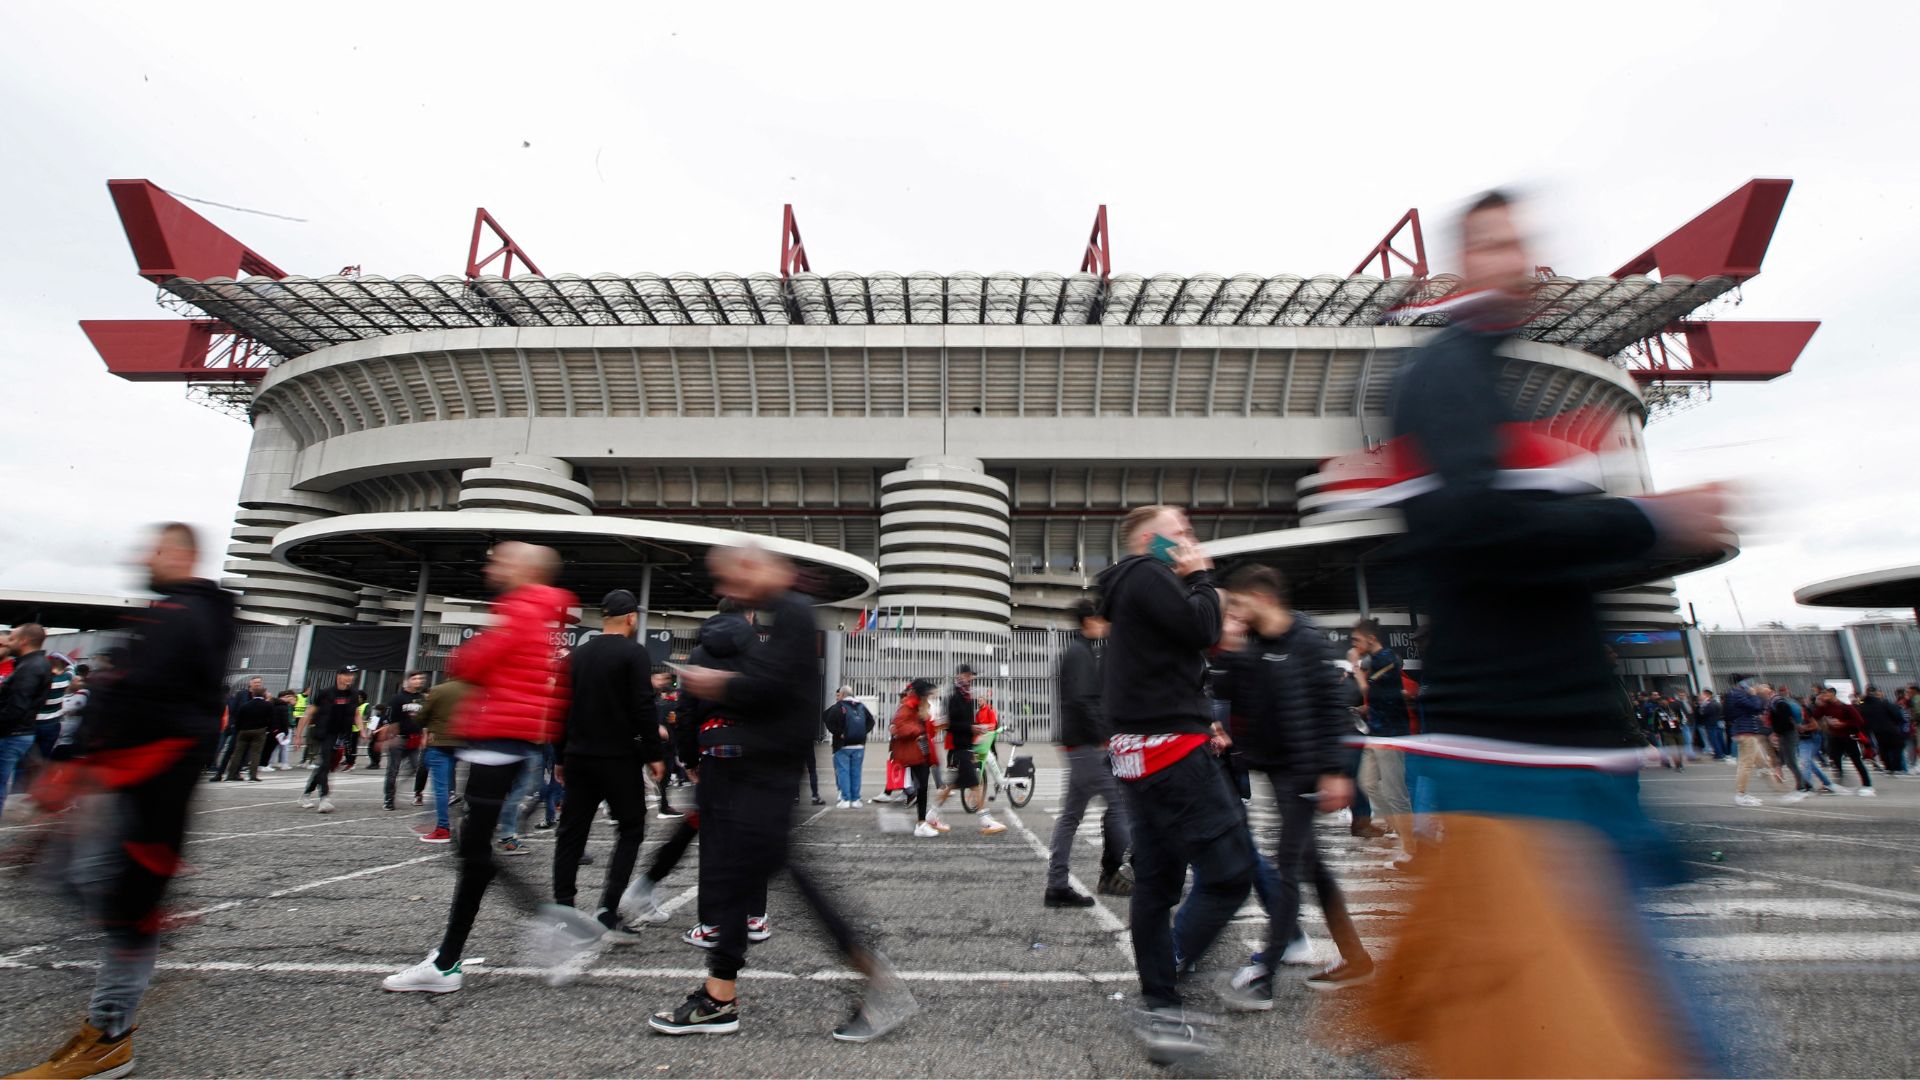 The San Siro is instantly recognizable – but deeply divisive. /Alessandro Garofalo /Reuters